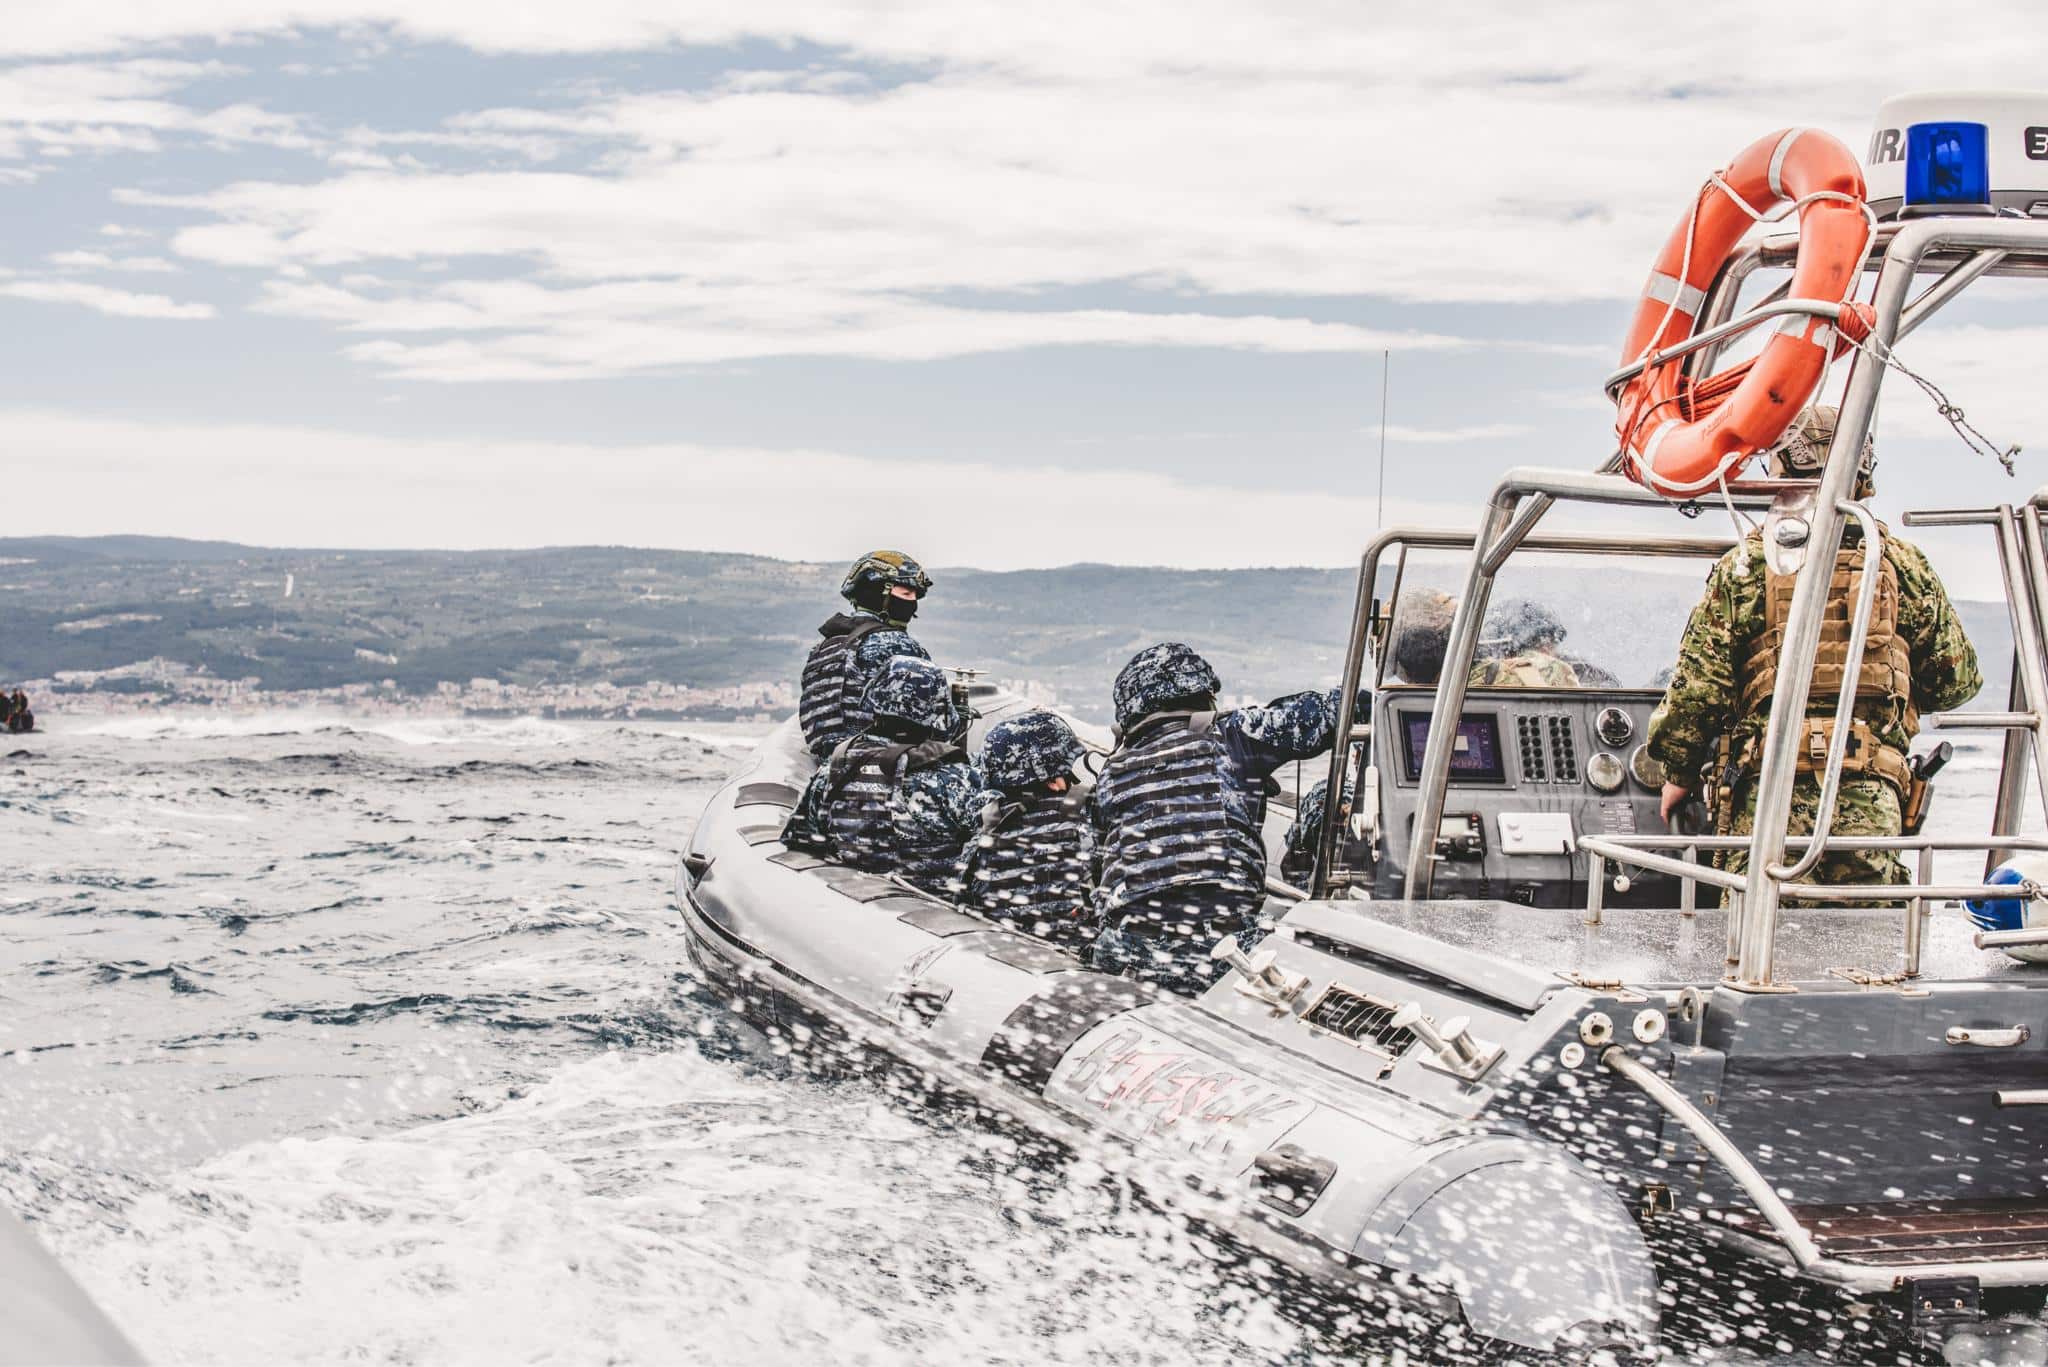 Naval Special Operations Forces from Croatia, Hungary, and the U.S. conduct maritime training in the Adriatic Sea during the Black Swan 21. Black Swan 21 is the annual Hungarian-led multinational special operations forces exercise conducted in Croatia, Hungary, Slovakia, and the United States.